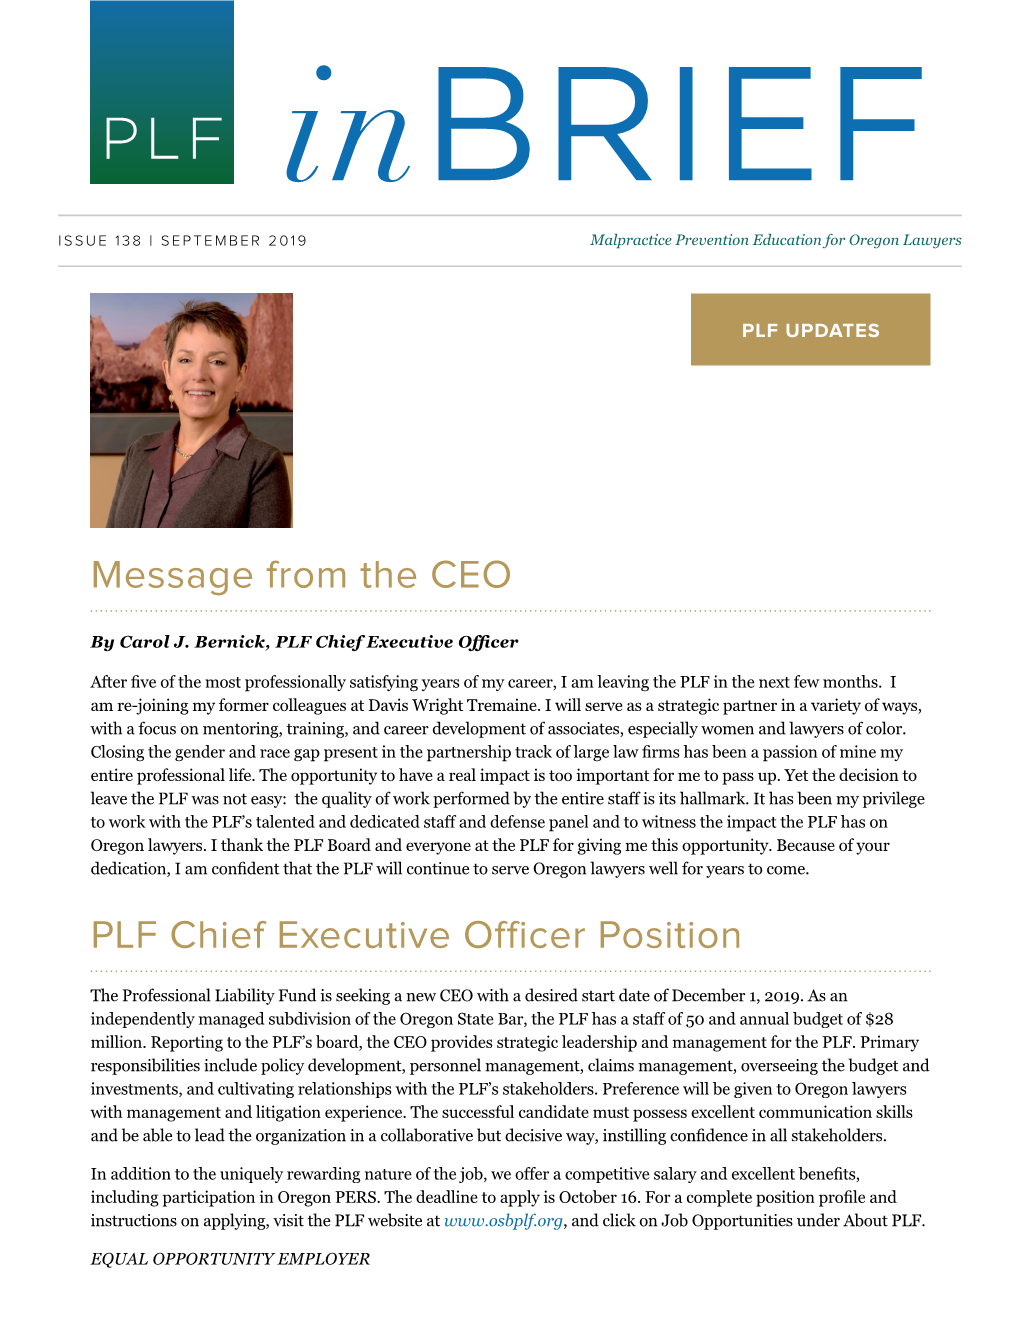 Message from the CEO PLF Chief Executive Officer Position